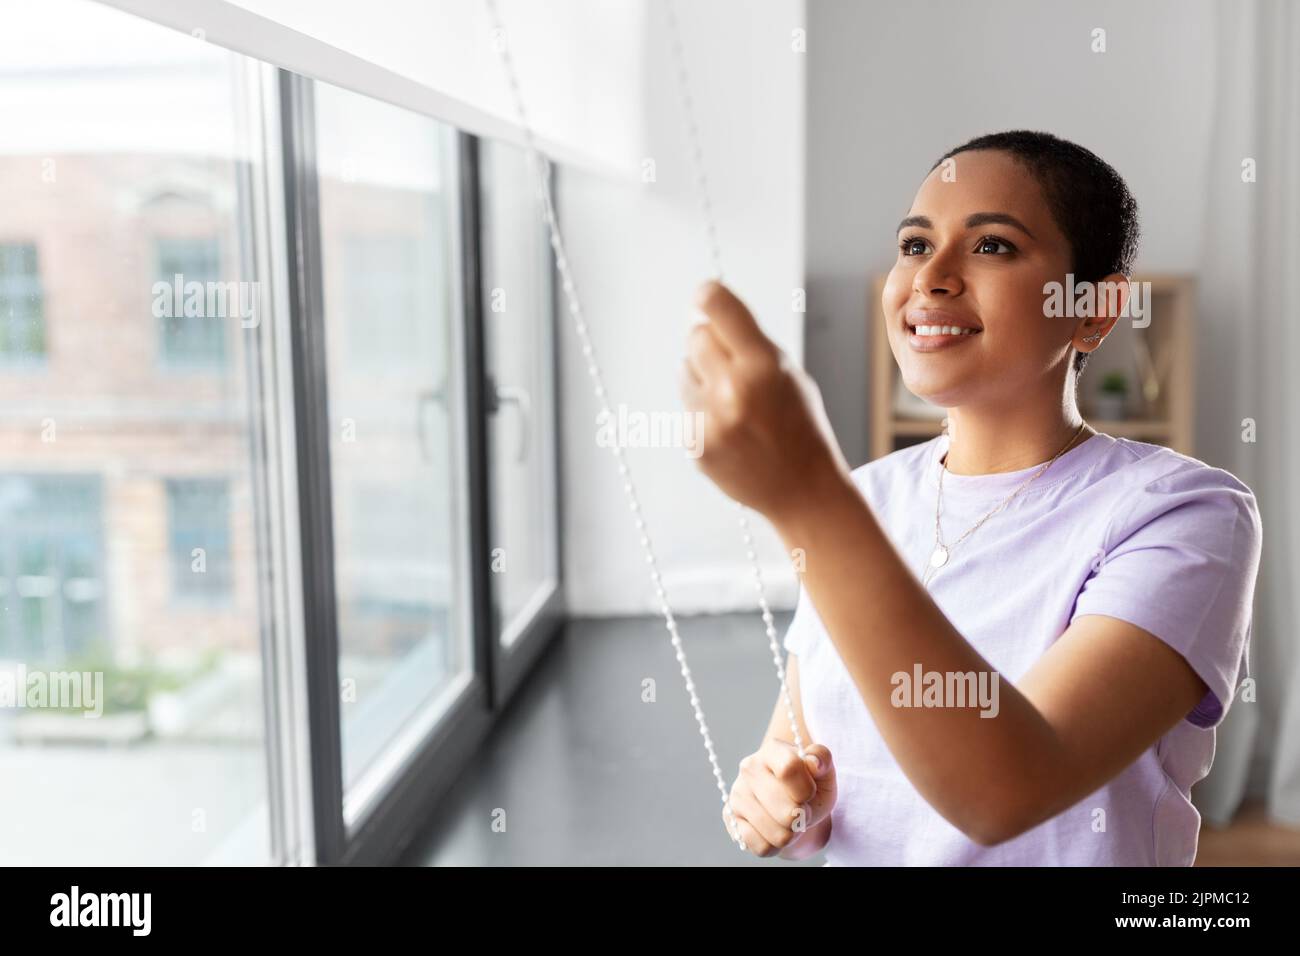 woman opening window roller blinds Stock Photo